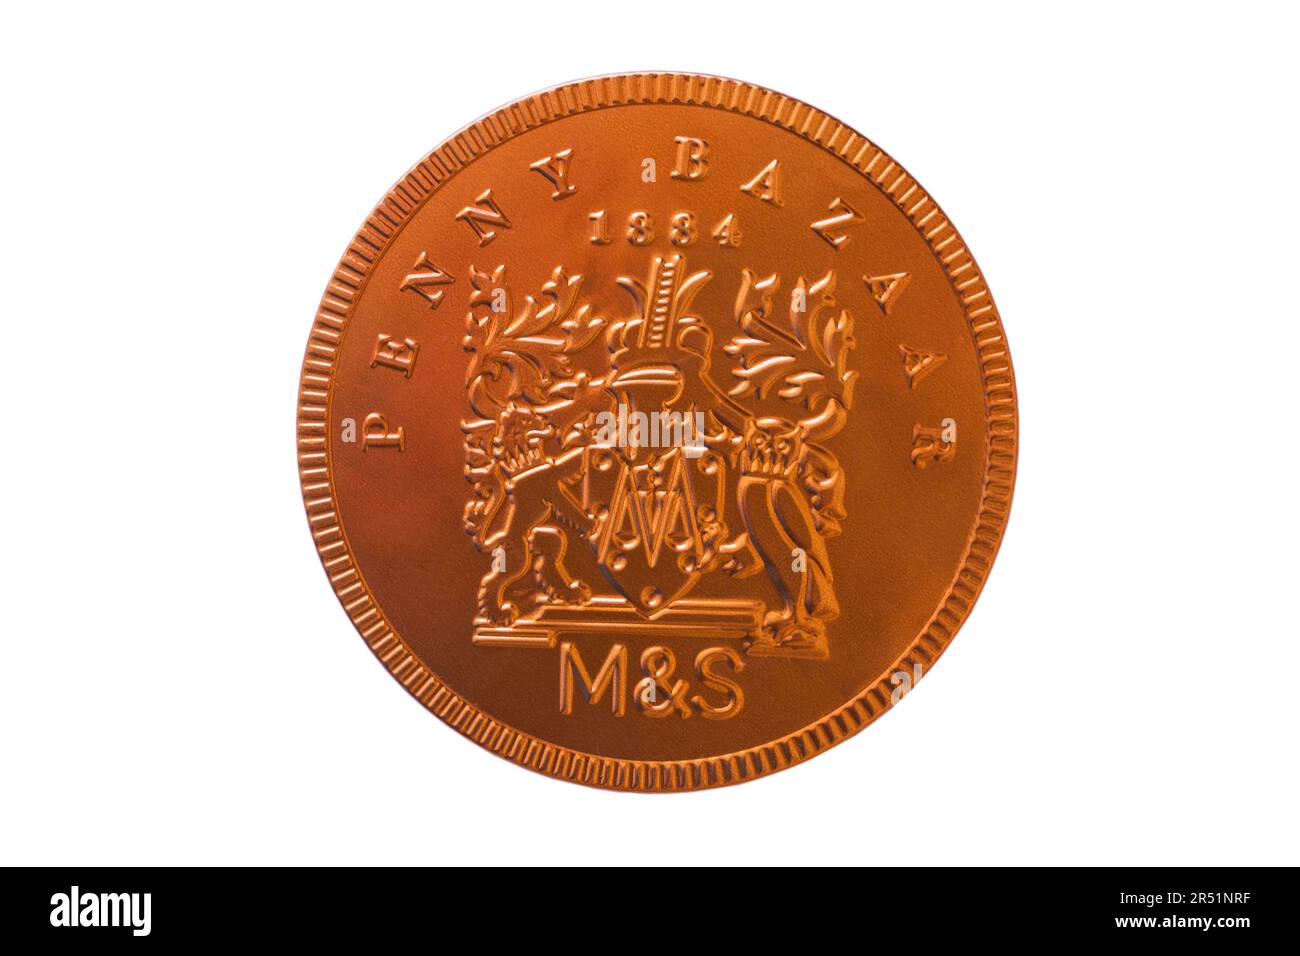 large Penny Bazaar 1884 foil wrapped milk chocolate coin from M&S isolated on white background Stock Photo